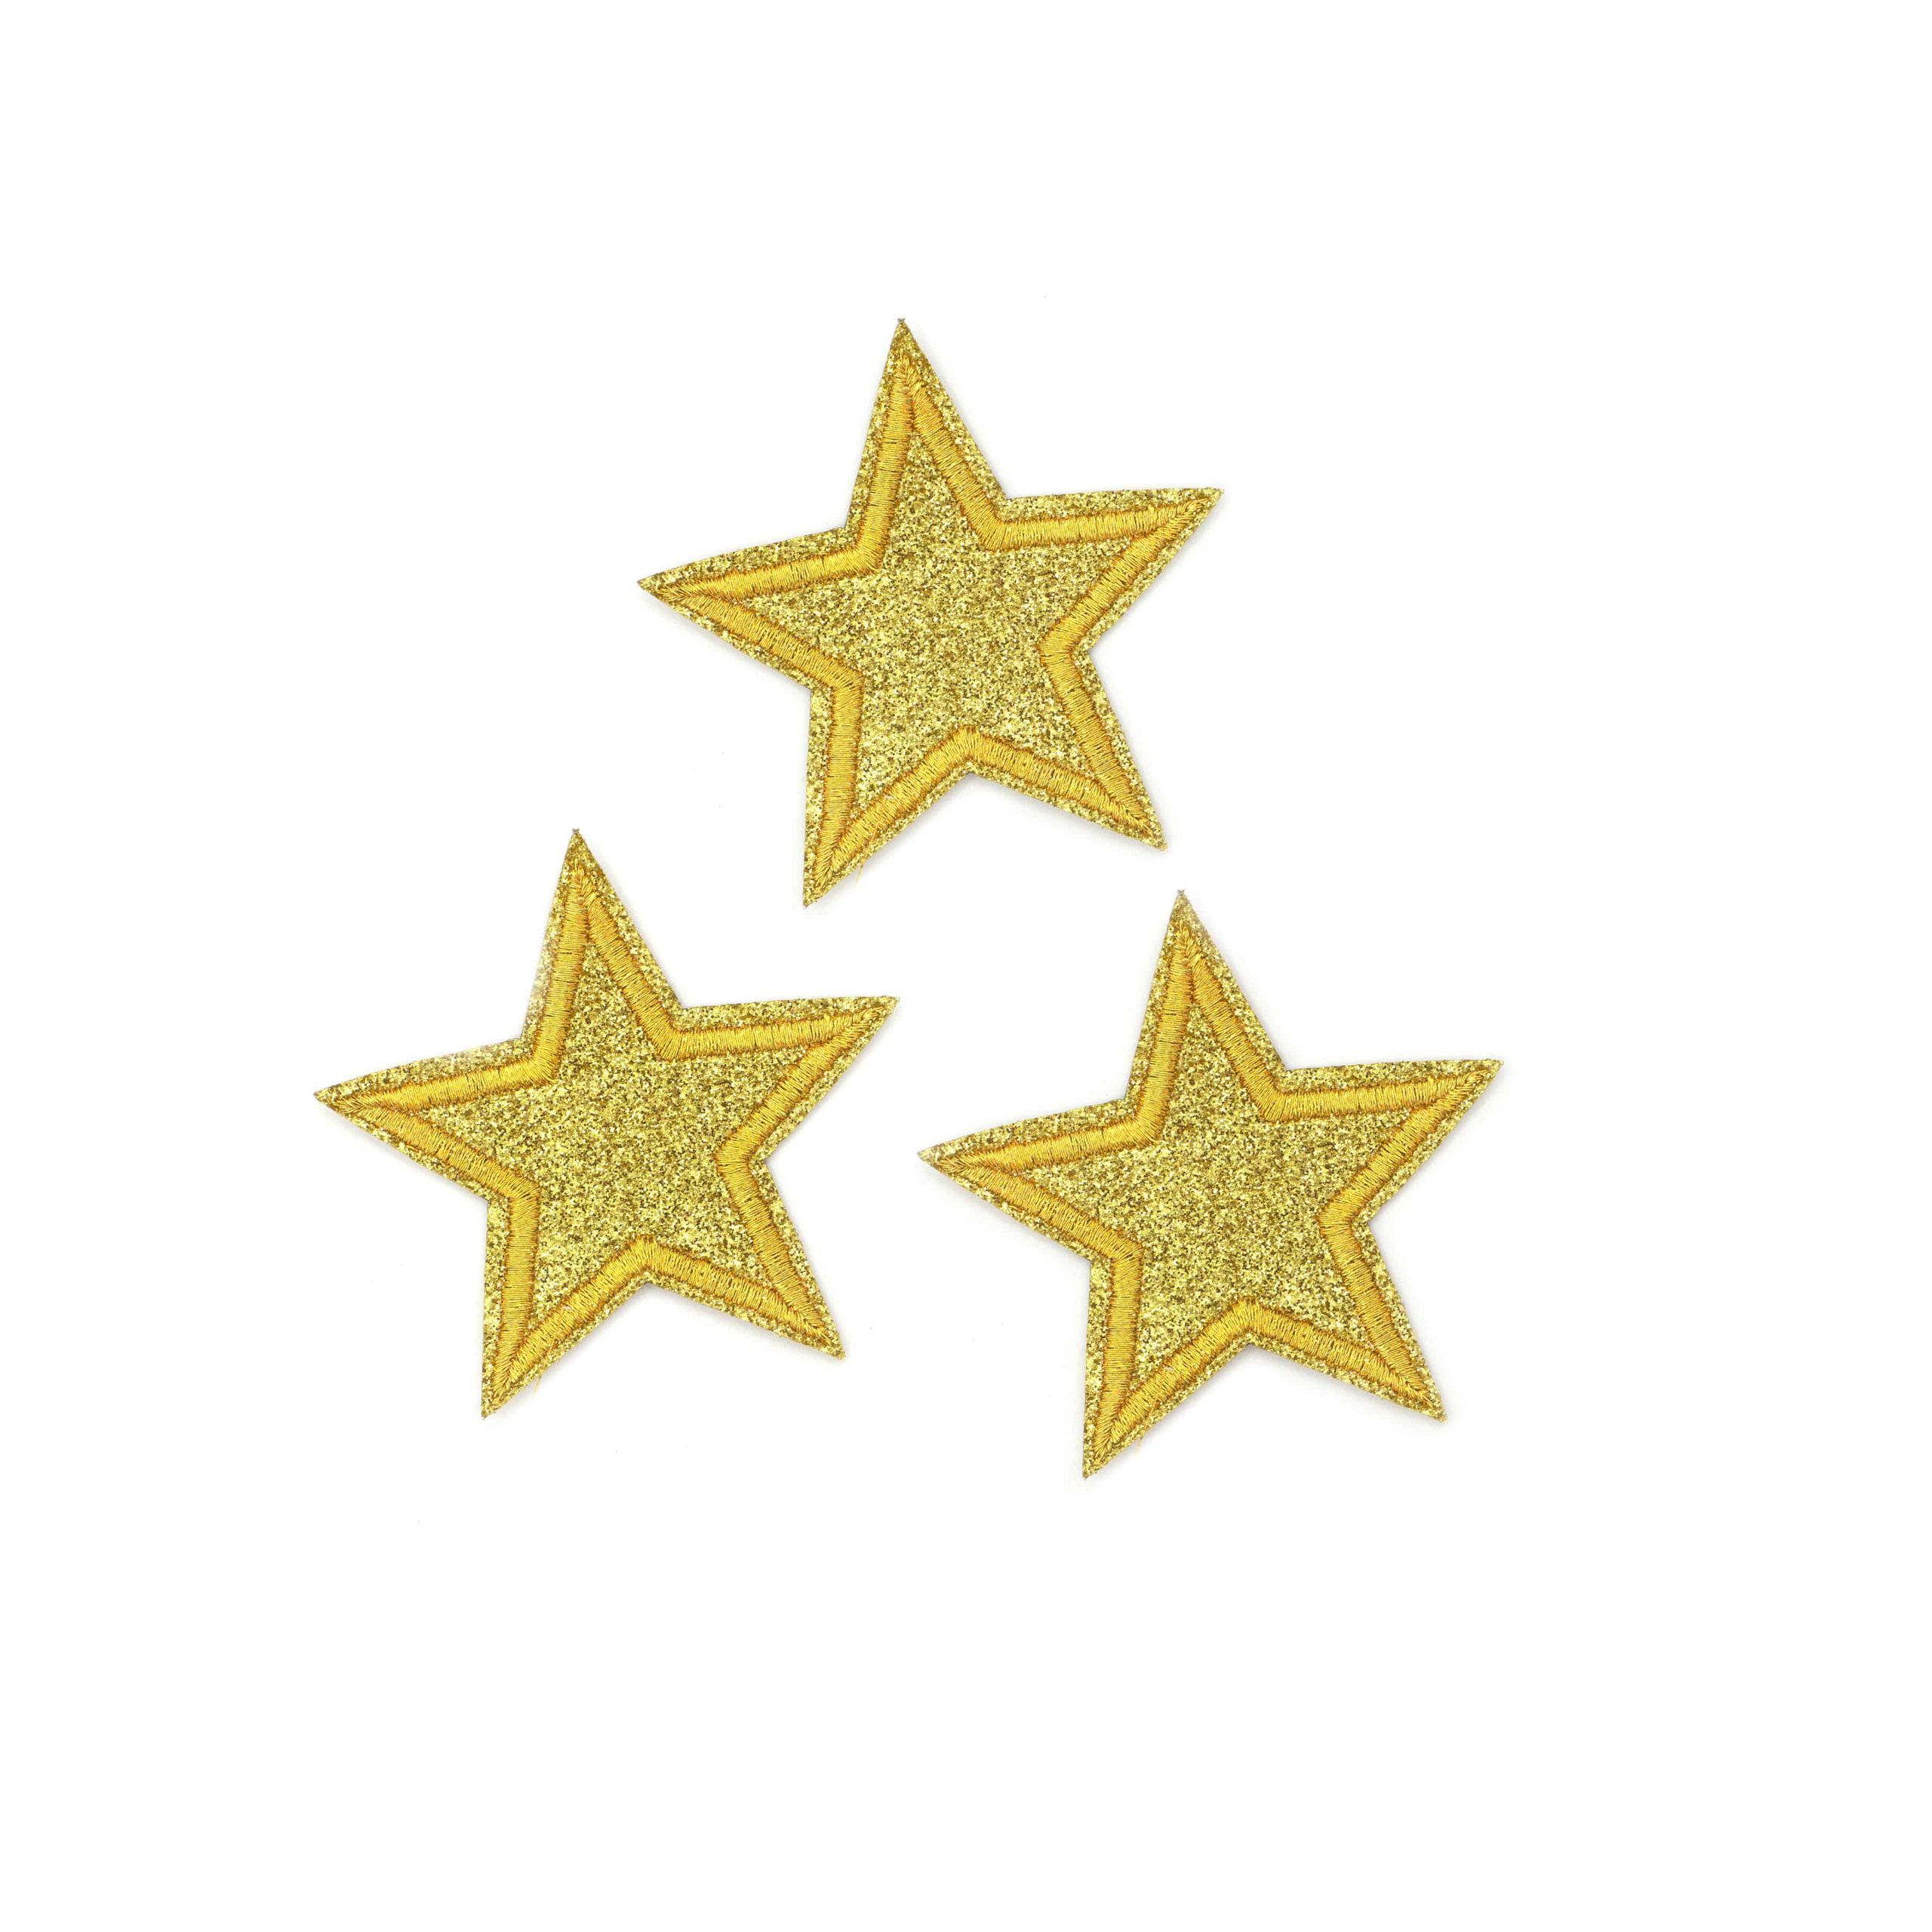 Iron-On Embroidered Star Patch Appliques Set of 3 (Gold or Silver)